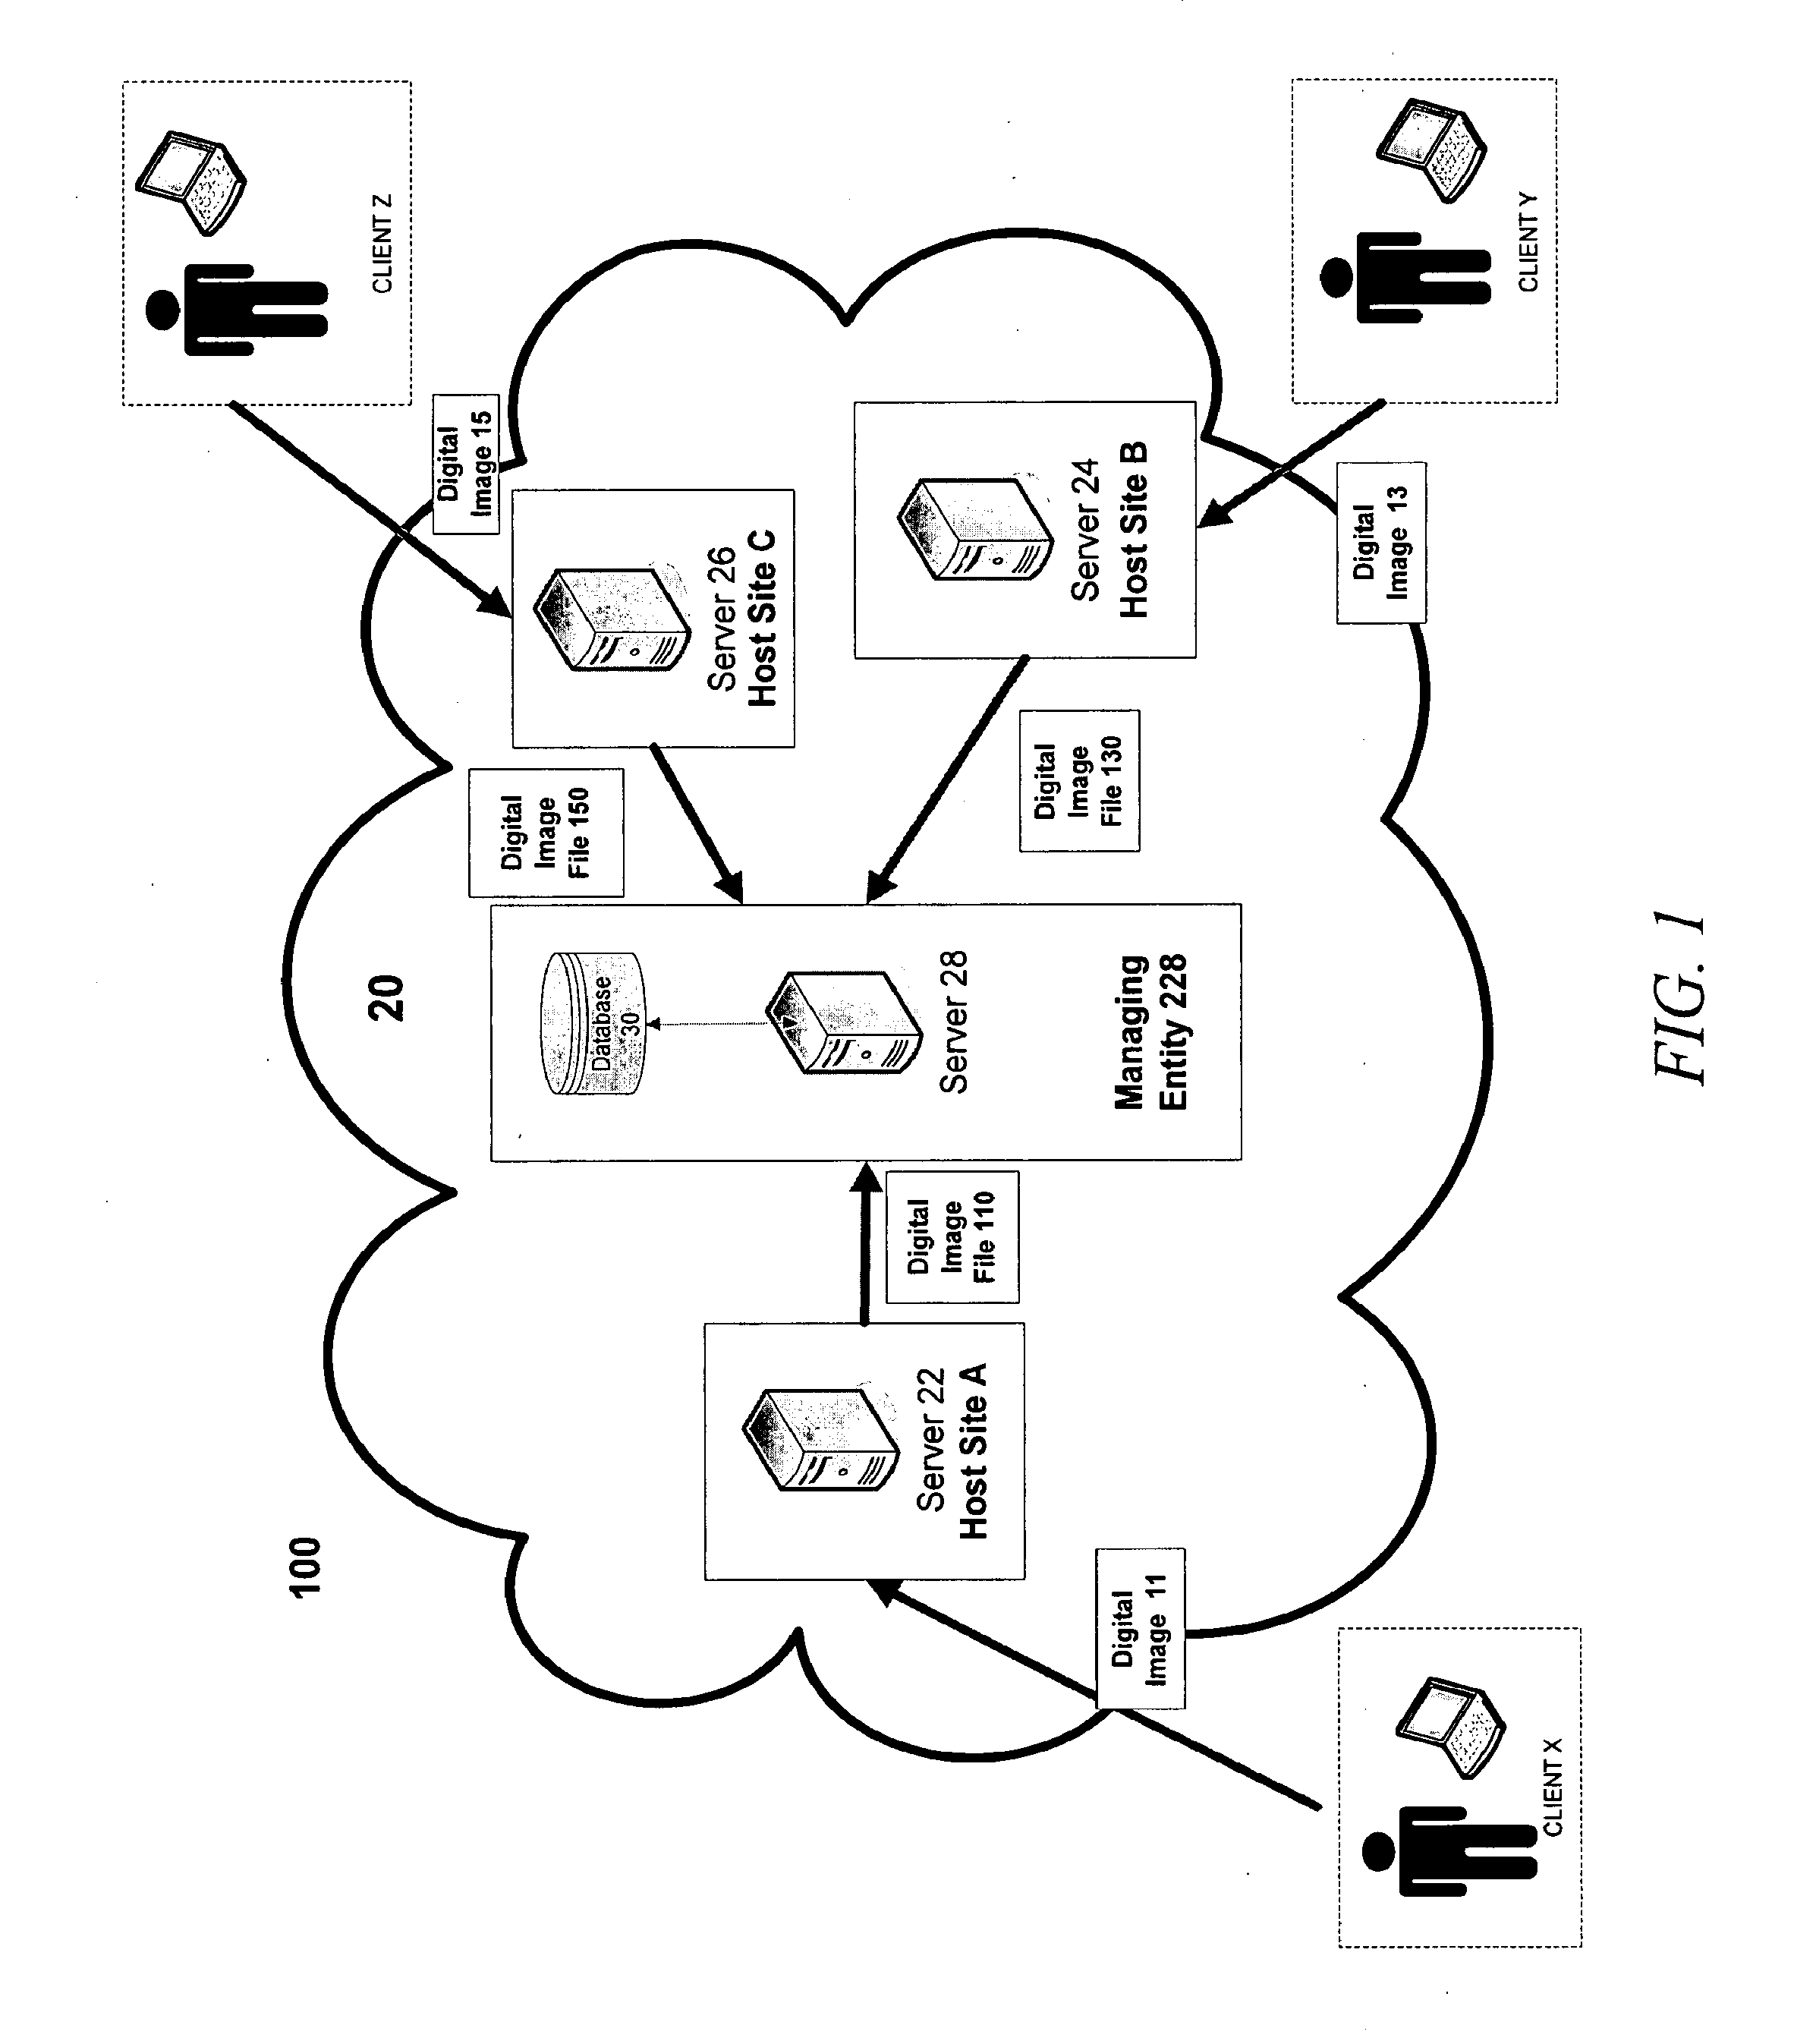 Methods and systems for providing online digital image rights management and identity protection in a digital environment